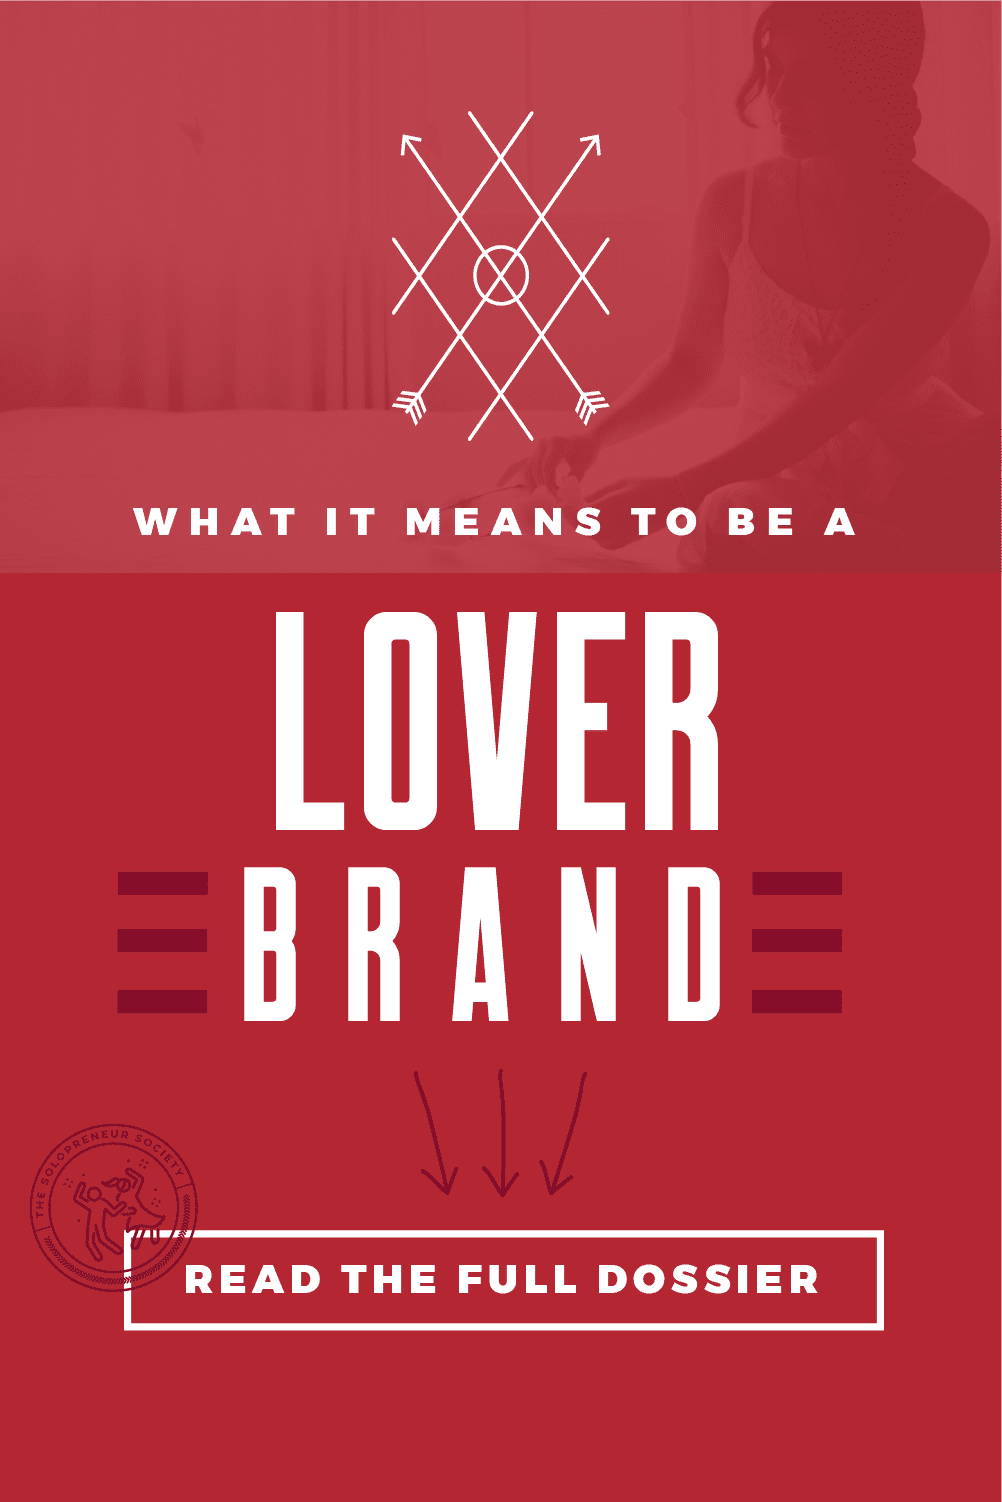 Lover Archetype Brand Personality